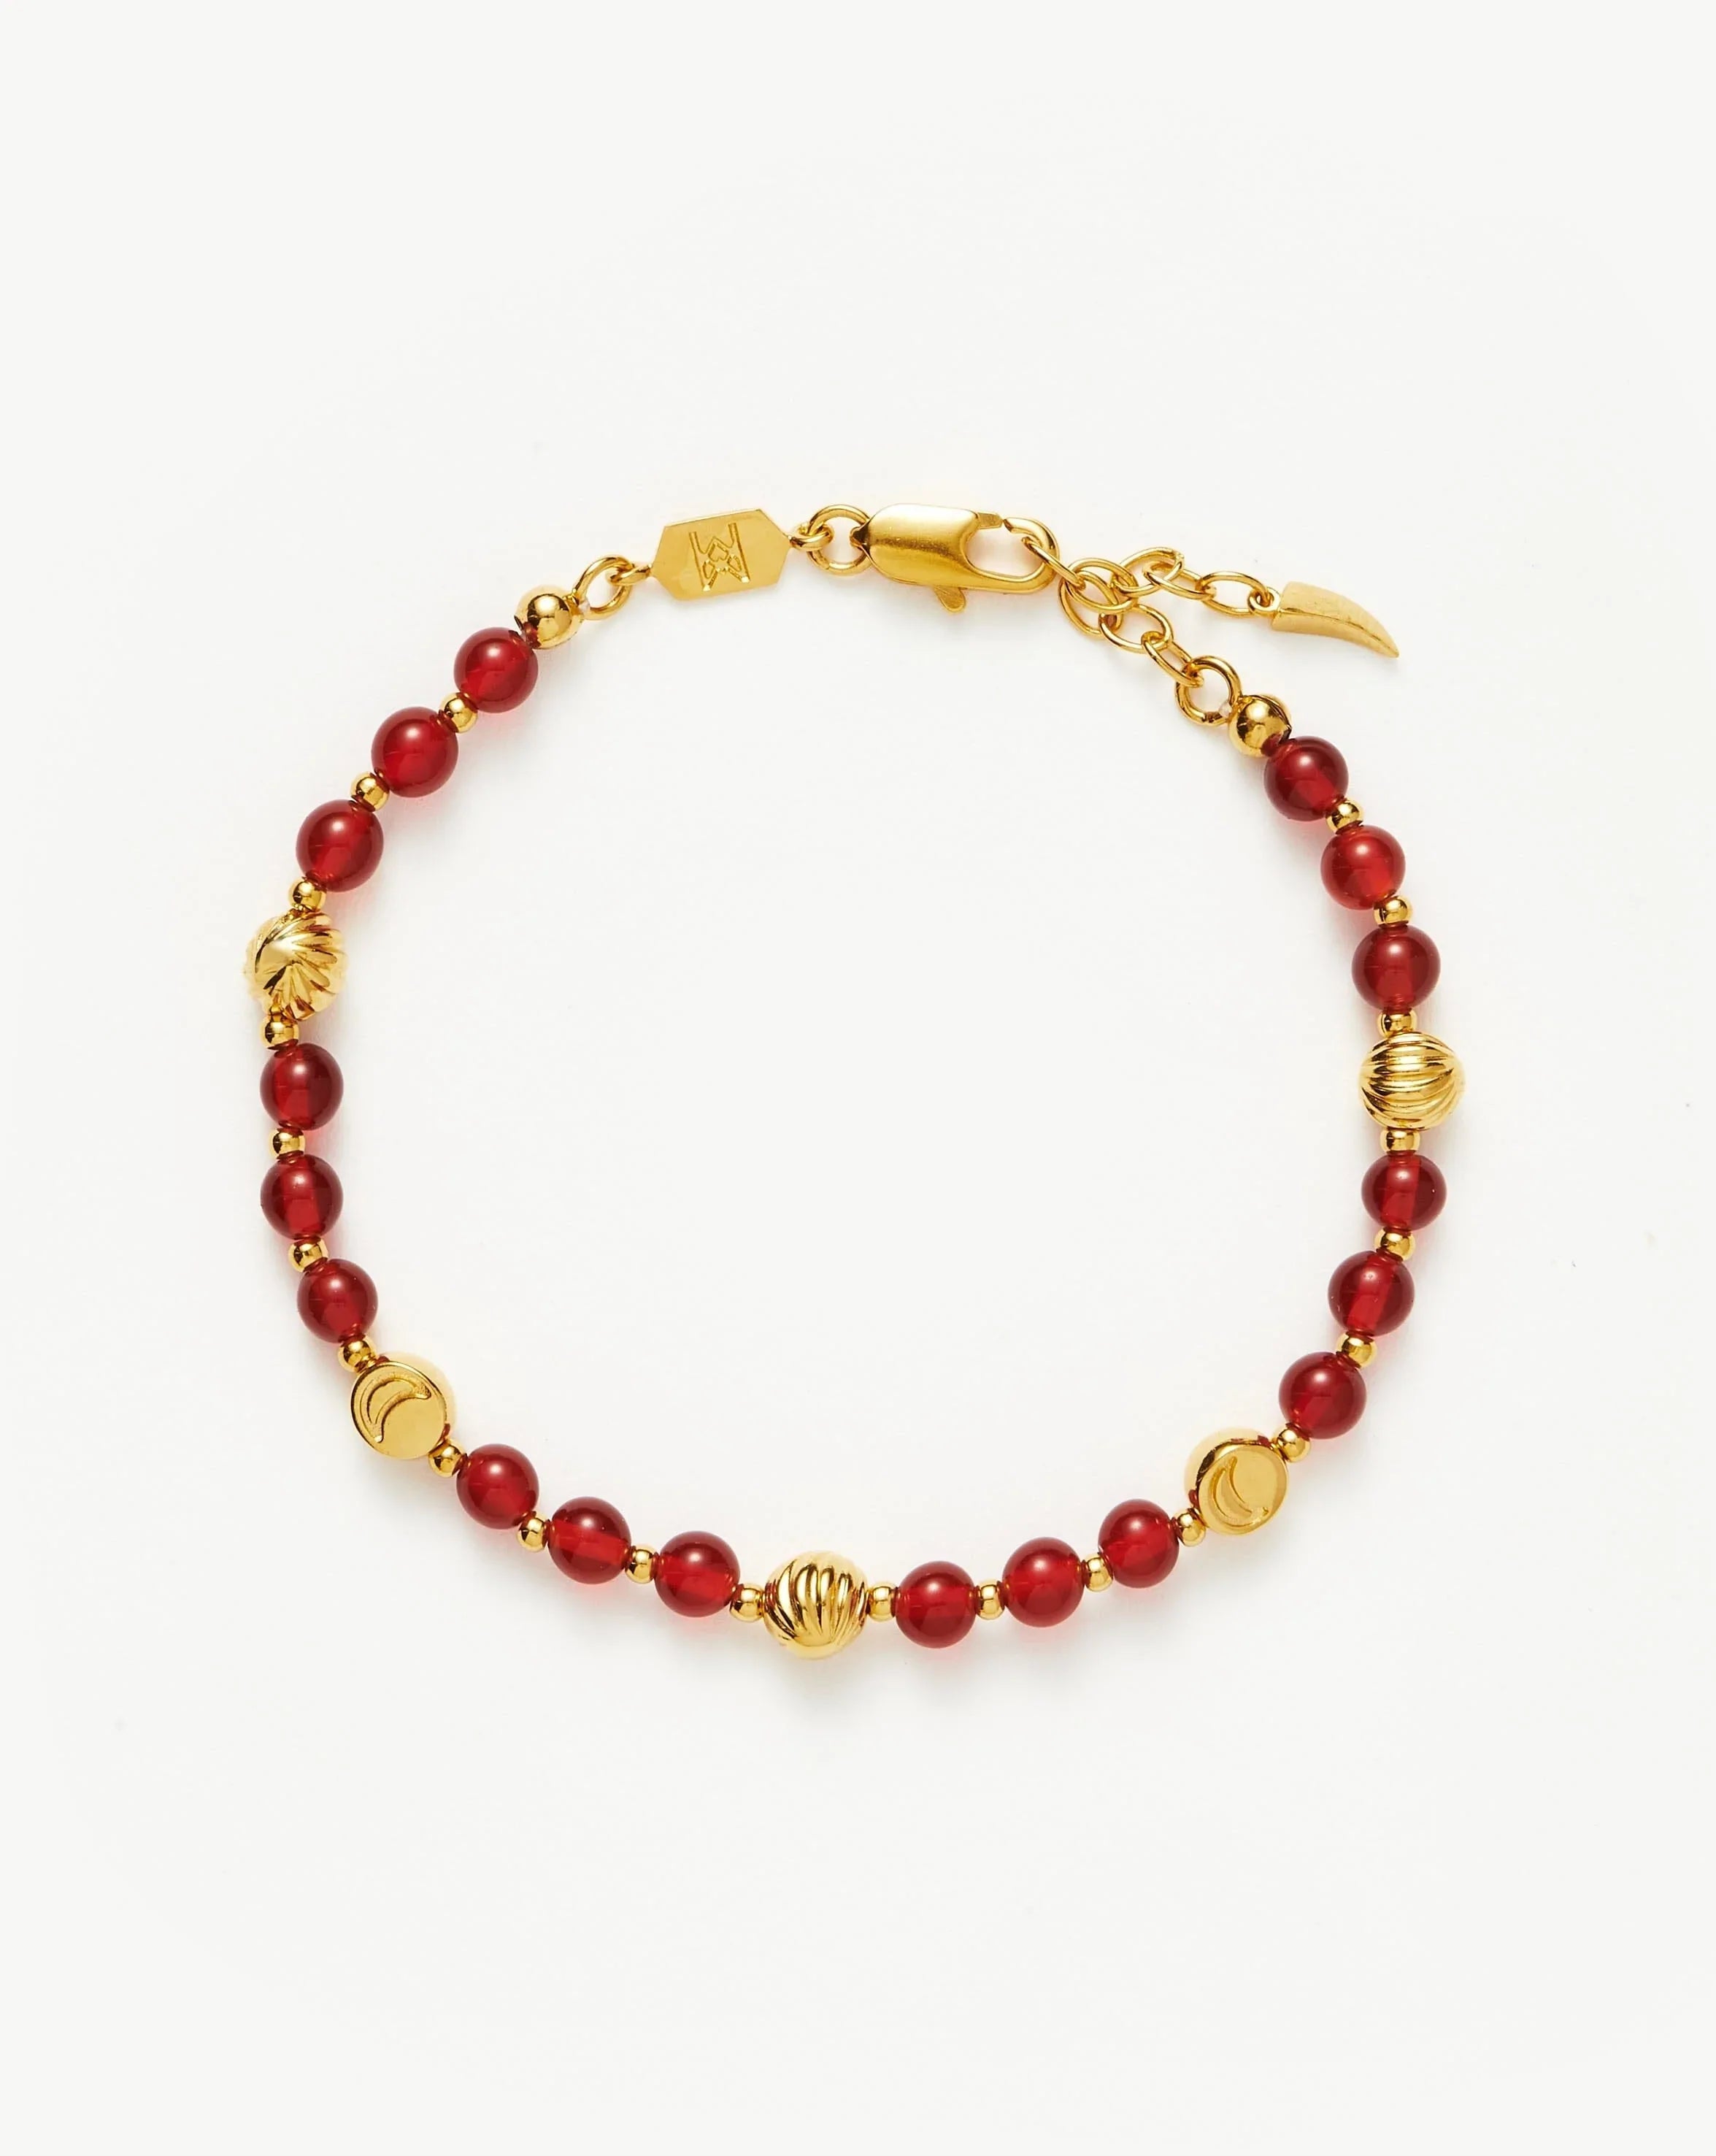 Savi Gemstone Beaded Bracelet | 18ct Gold Plated Vermeil/Red Chalcedony Bracelets Missoma 18ct Gold Plated/Red Chalcedony 